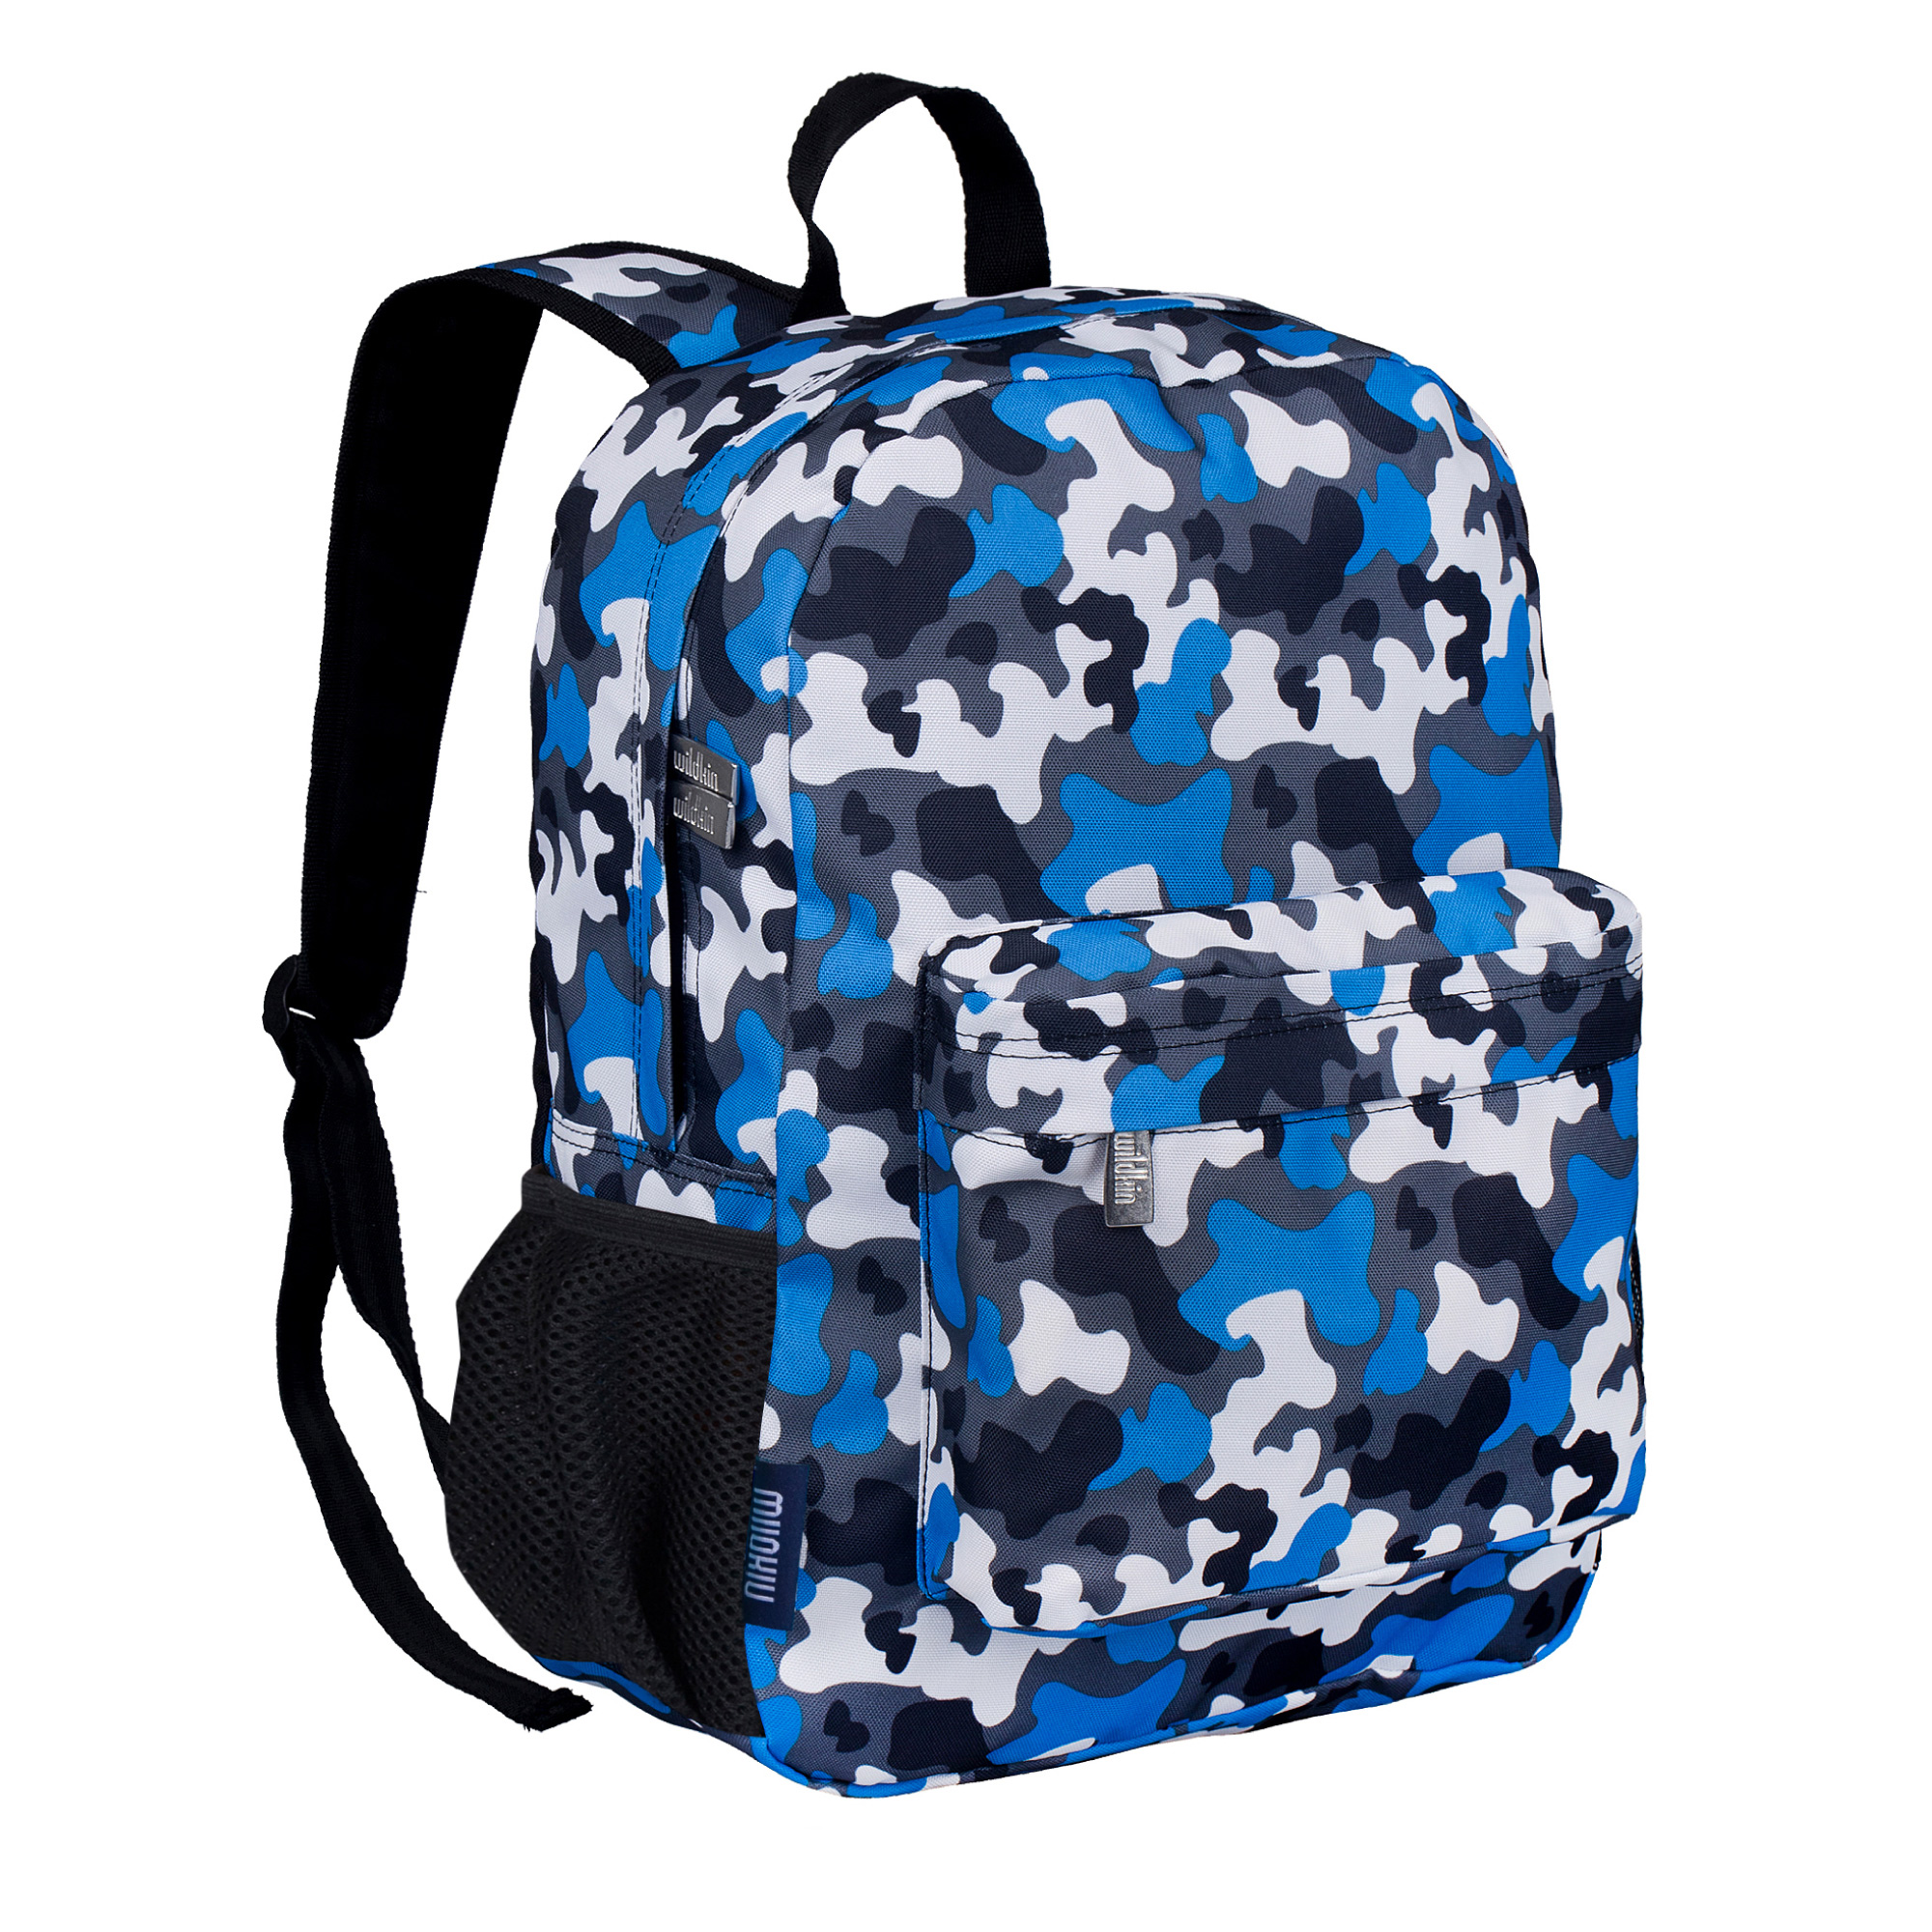 Wildkin Kids 16 Inch Backpack for Boys and Girls, Features Padded Back & Adjustable Straps (Blue Camo) - image 1 of 8